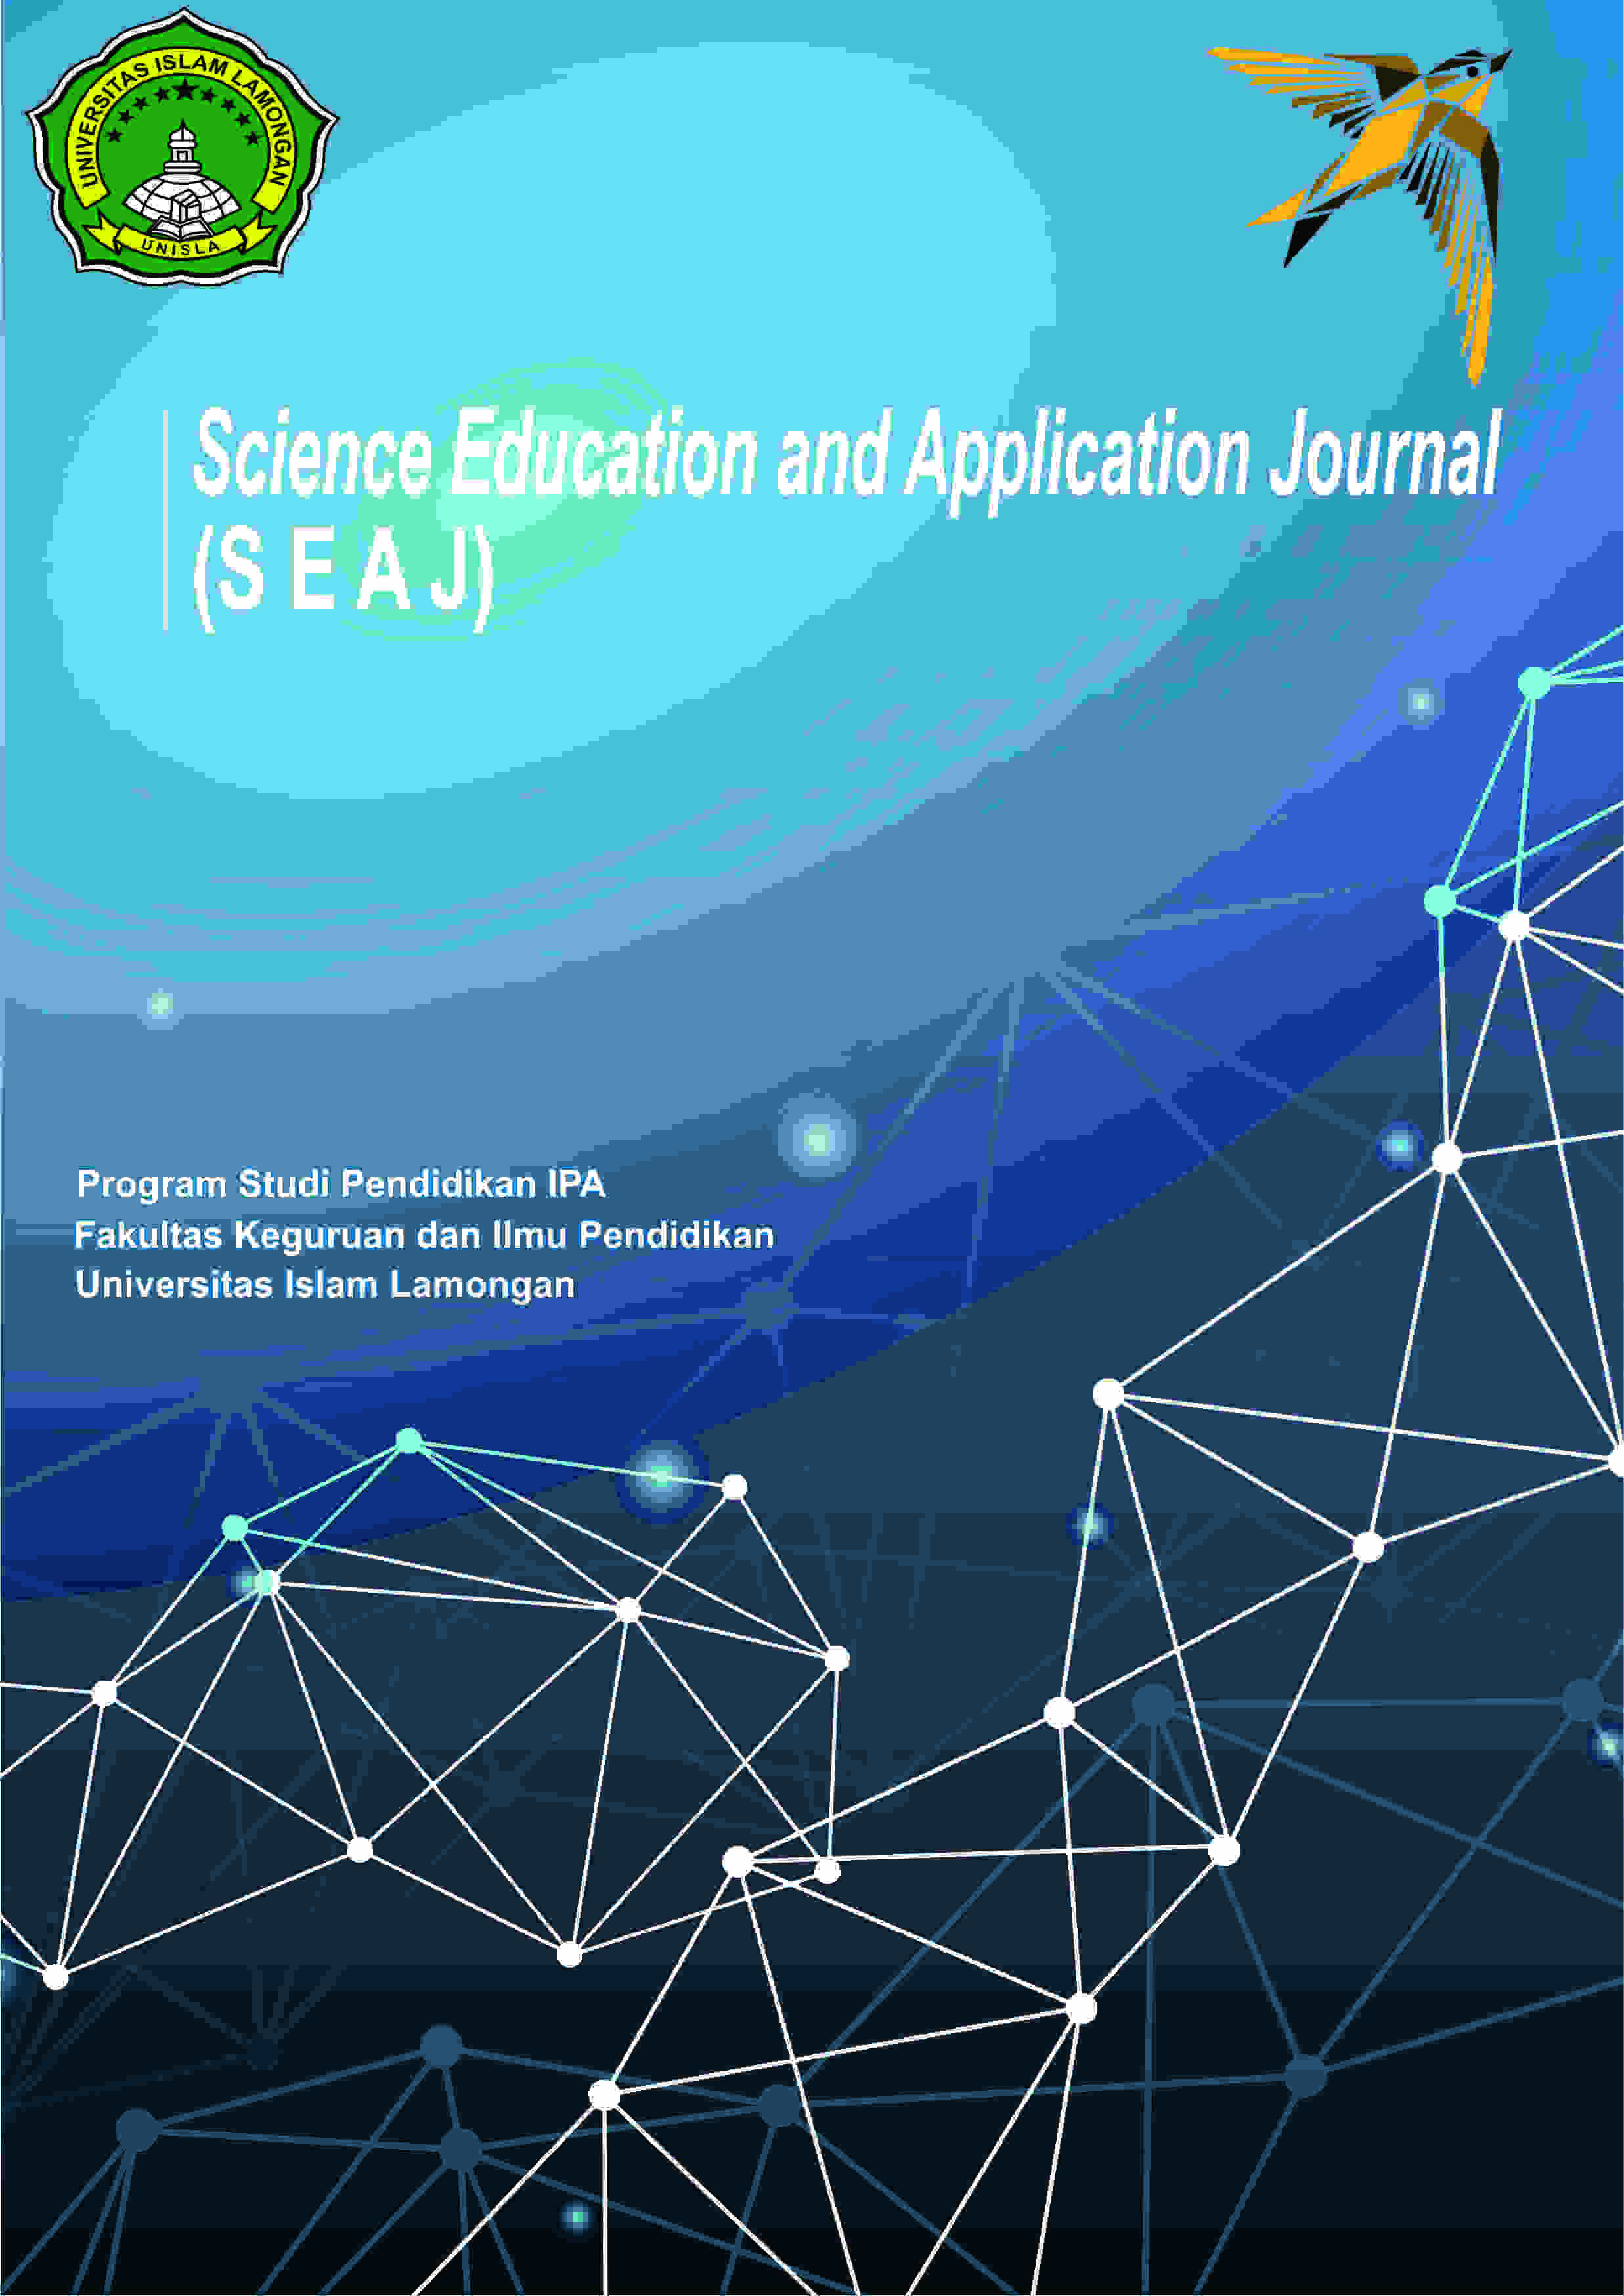 					View Vol. 1 No. 2 (2019): Science Education and Application Journal
				